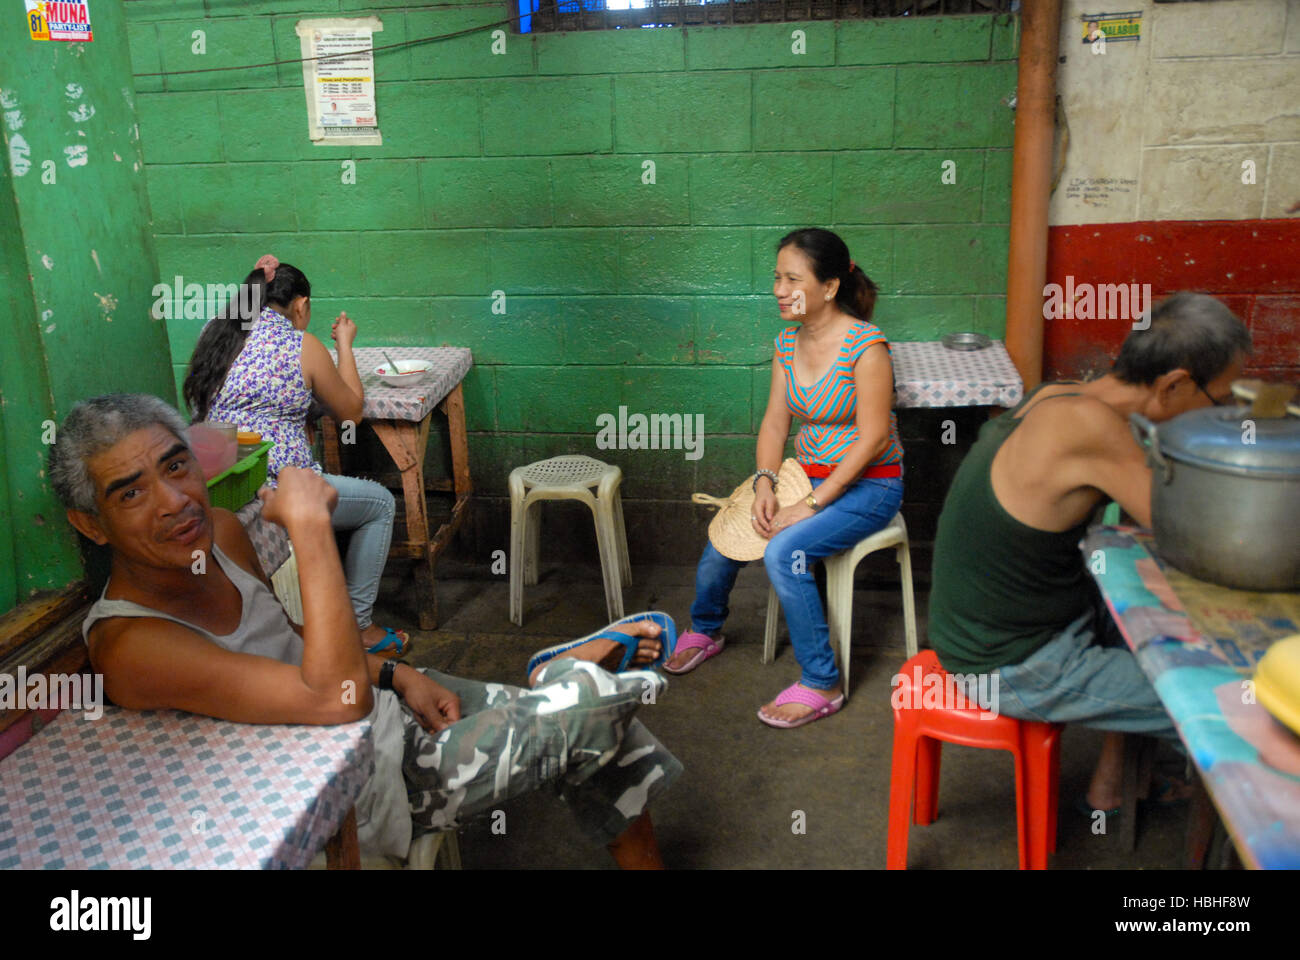 A café in the Interior of Central market, Iloilo, Panay, Philippines Stock Photo